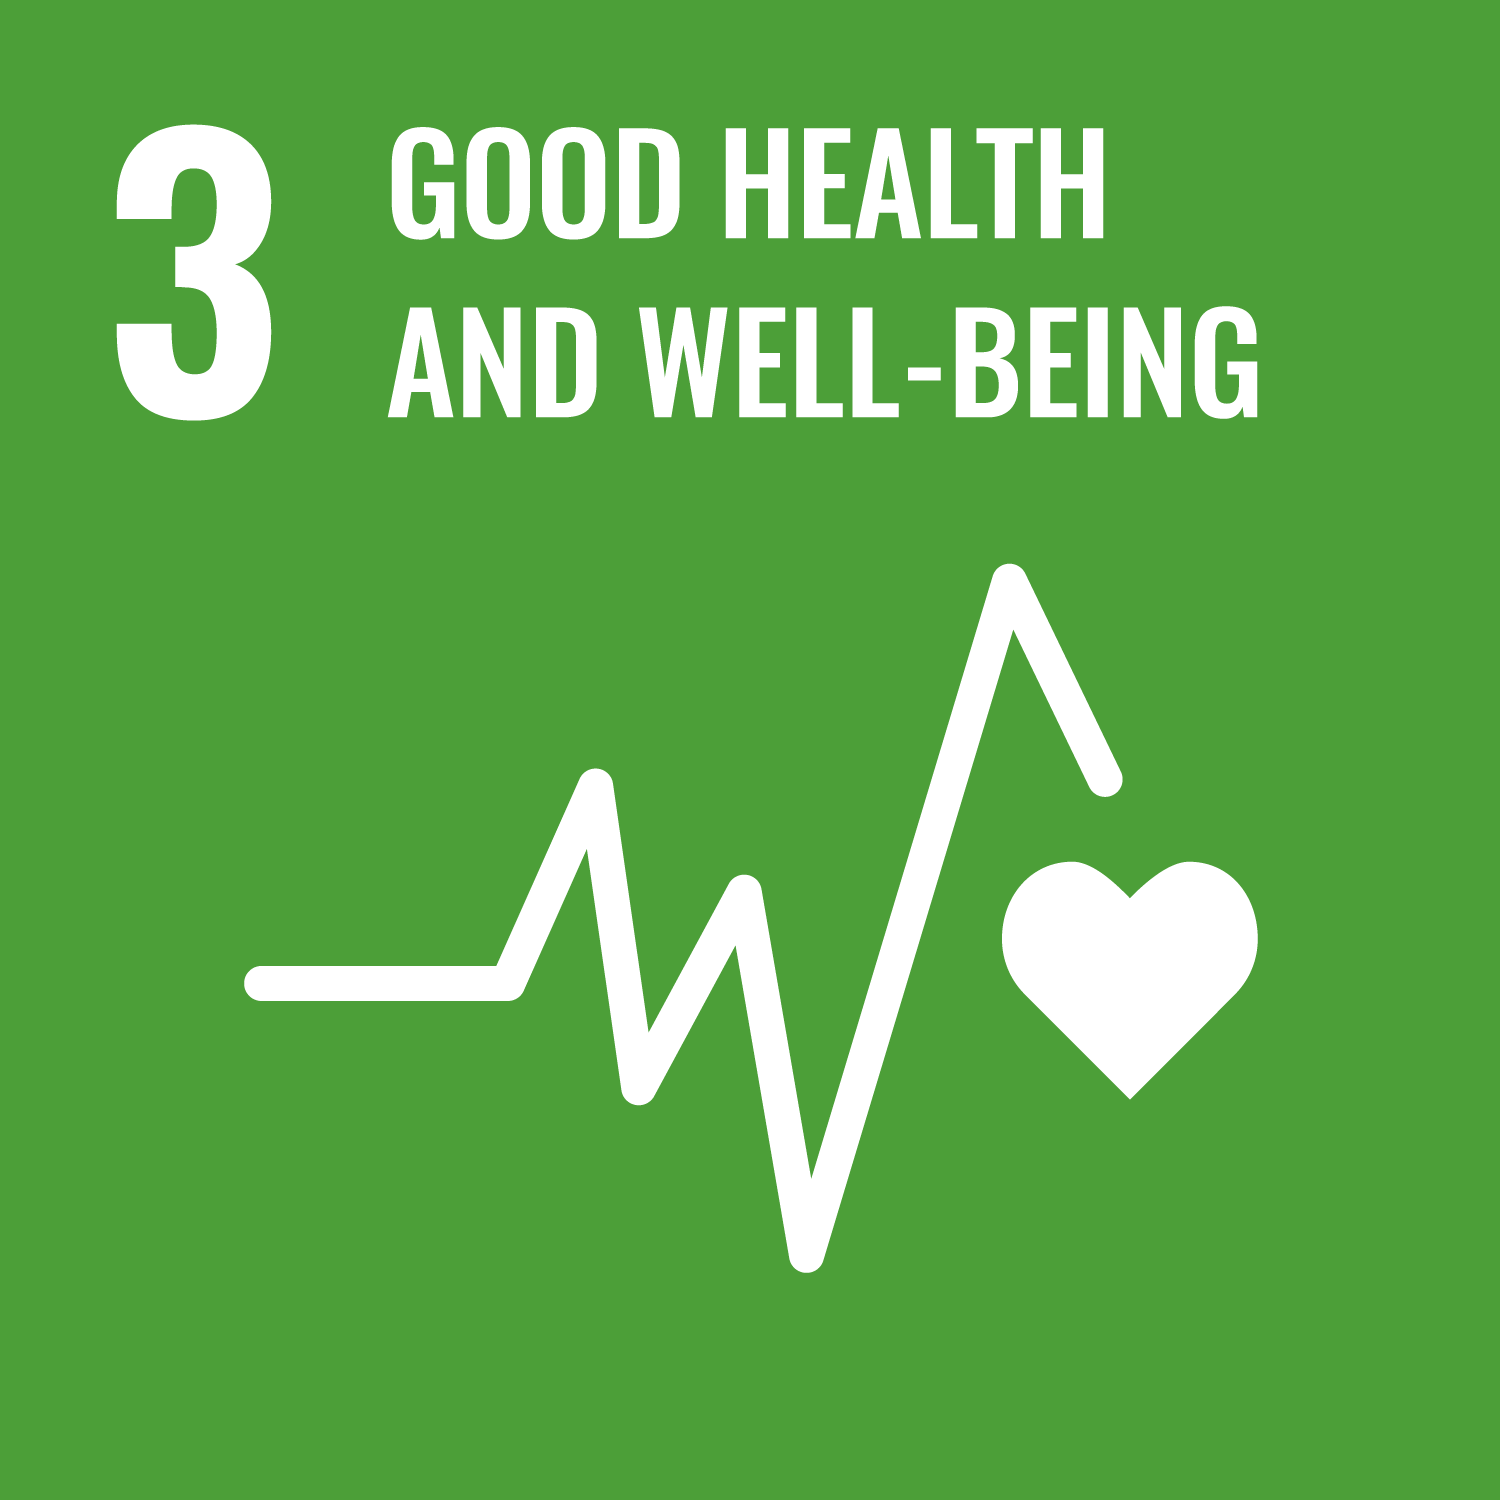 United Nations Sustainable Development Goal 3 Good Health and Well-Being